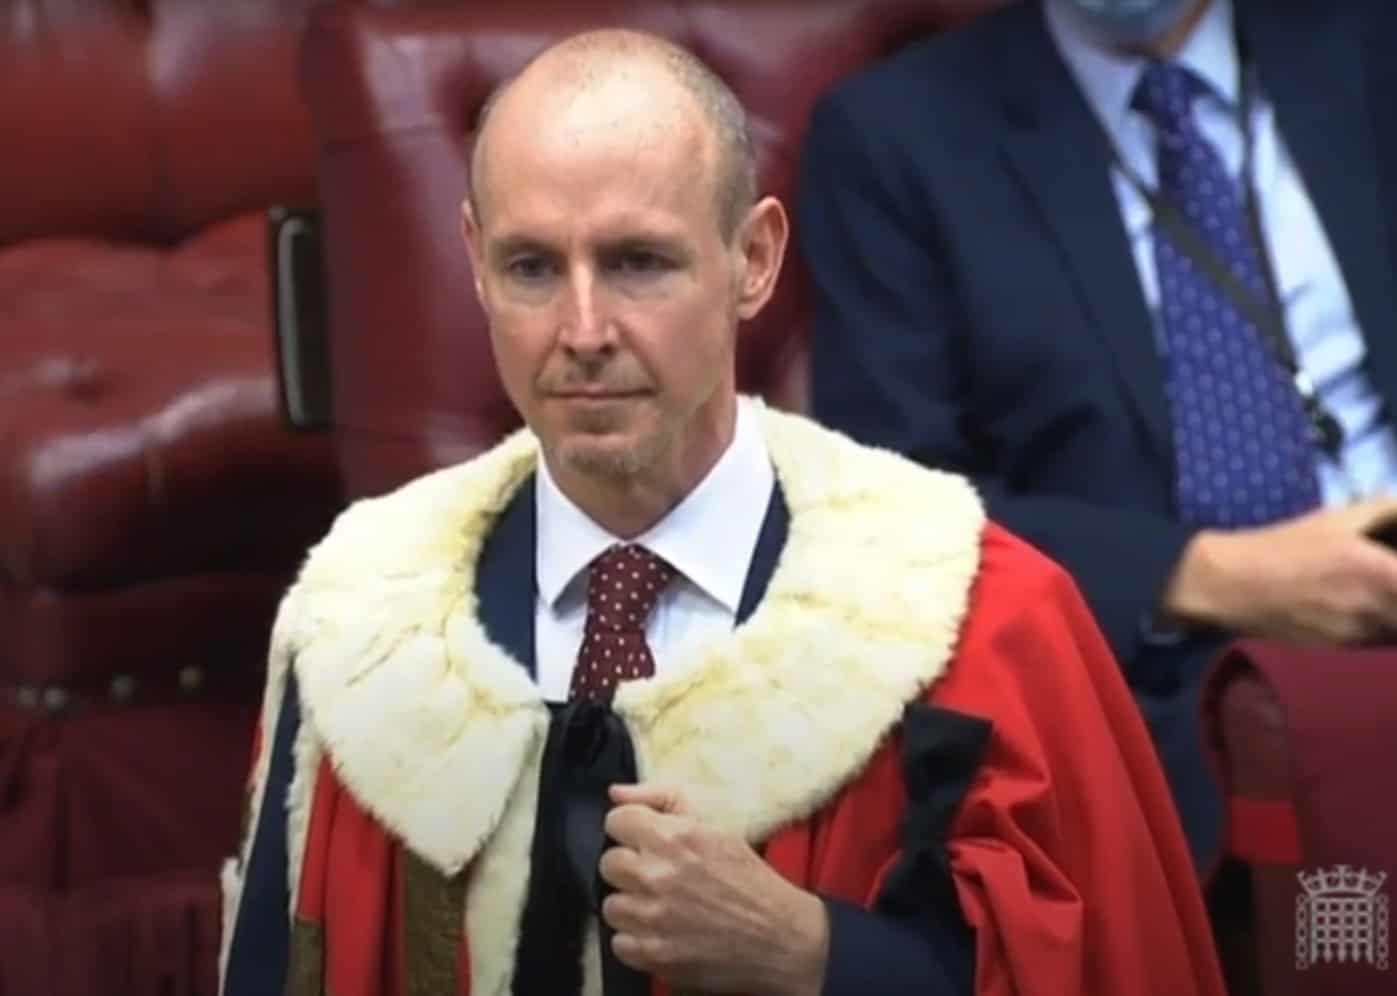 Daniel Hannan introduced in the House of Lords